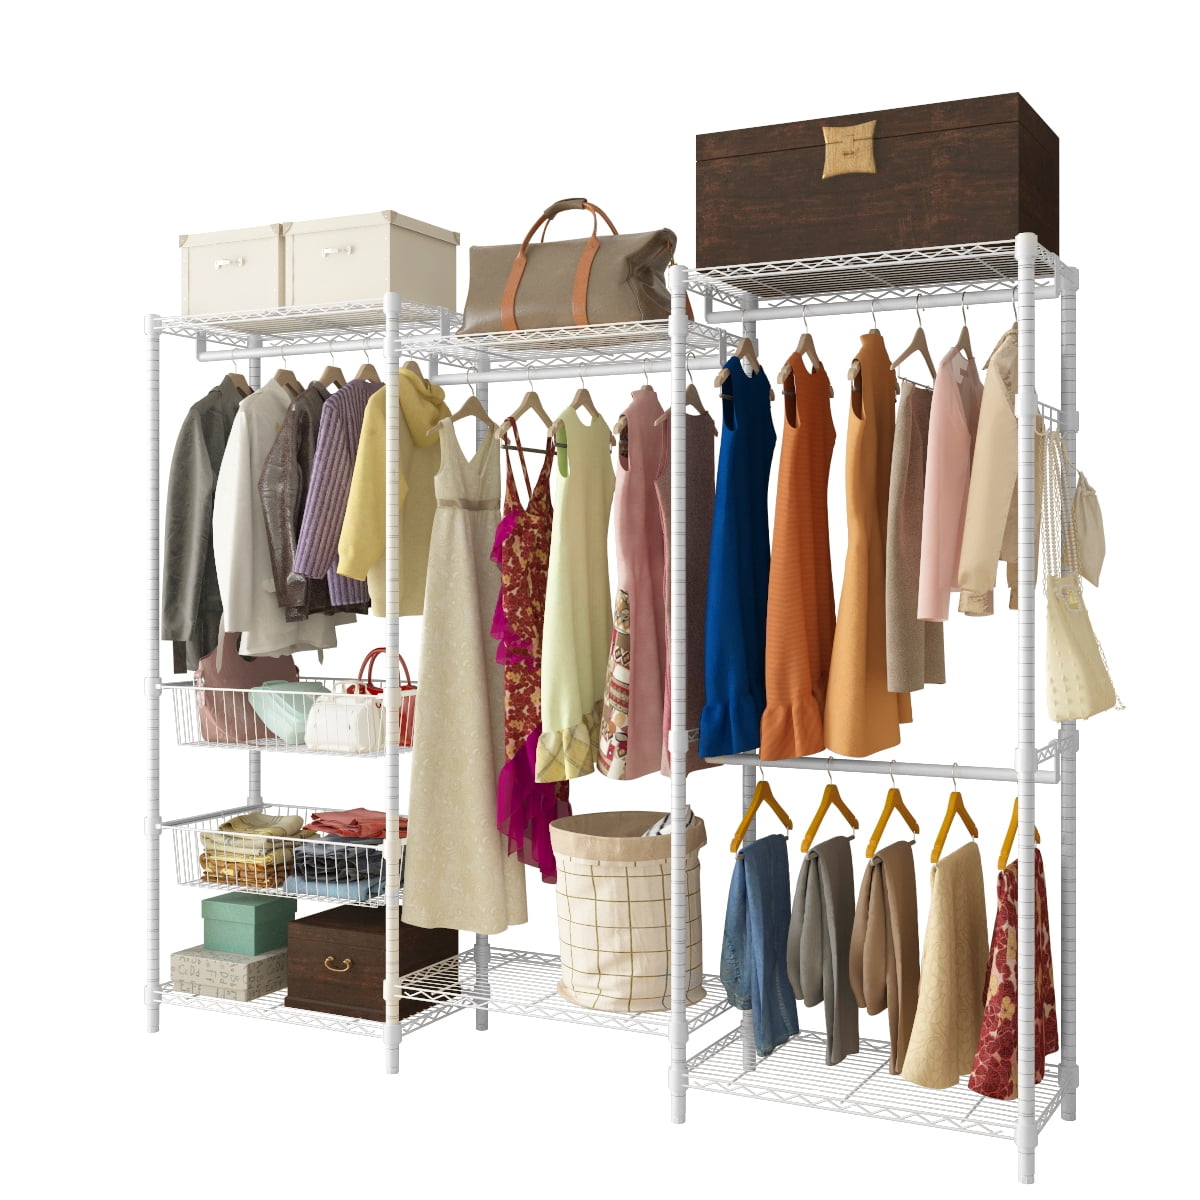 The interior of a fashion store of women's clothing of a famous brand. Mass  market. Brand clothes. All things are laid out neatly on the shelves in the  closet. Wardrobe order. Photos